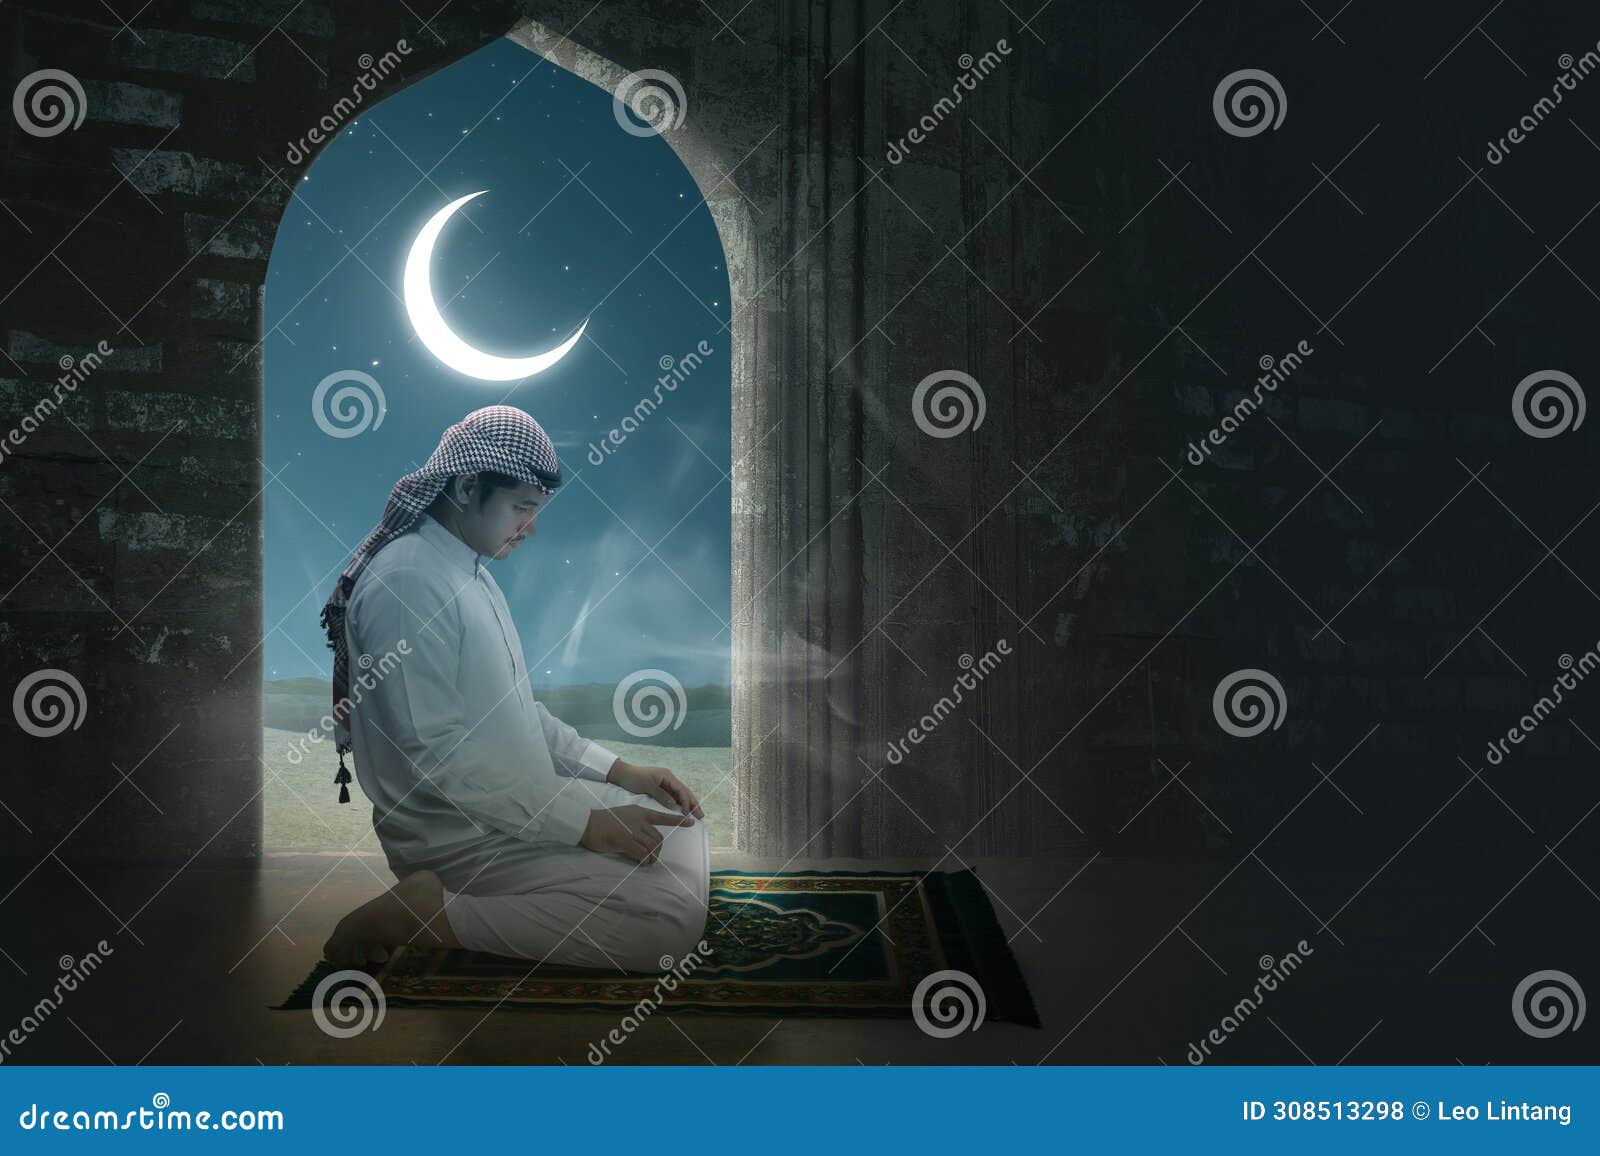 a muslim man with agal in a praying position (salat) in the mosque